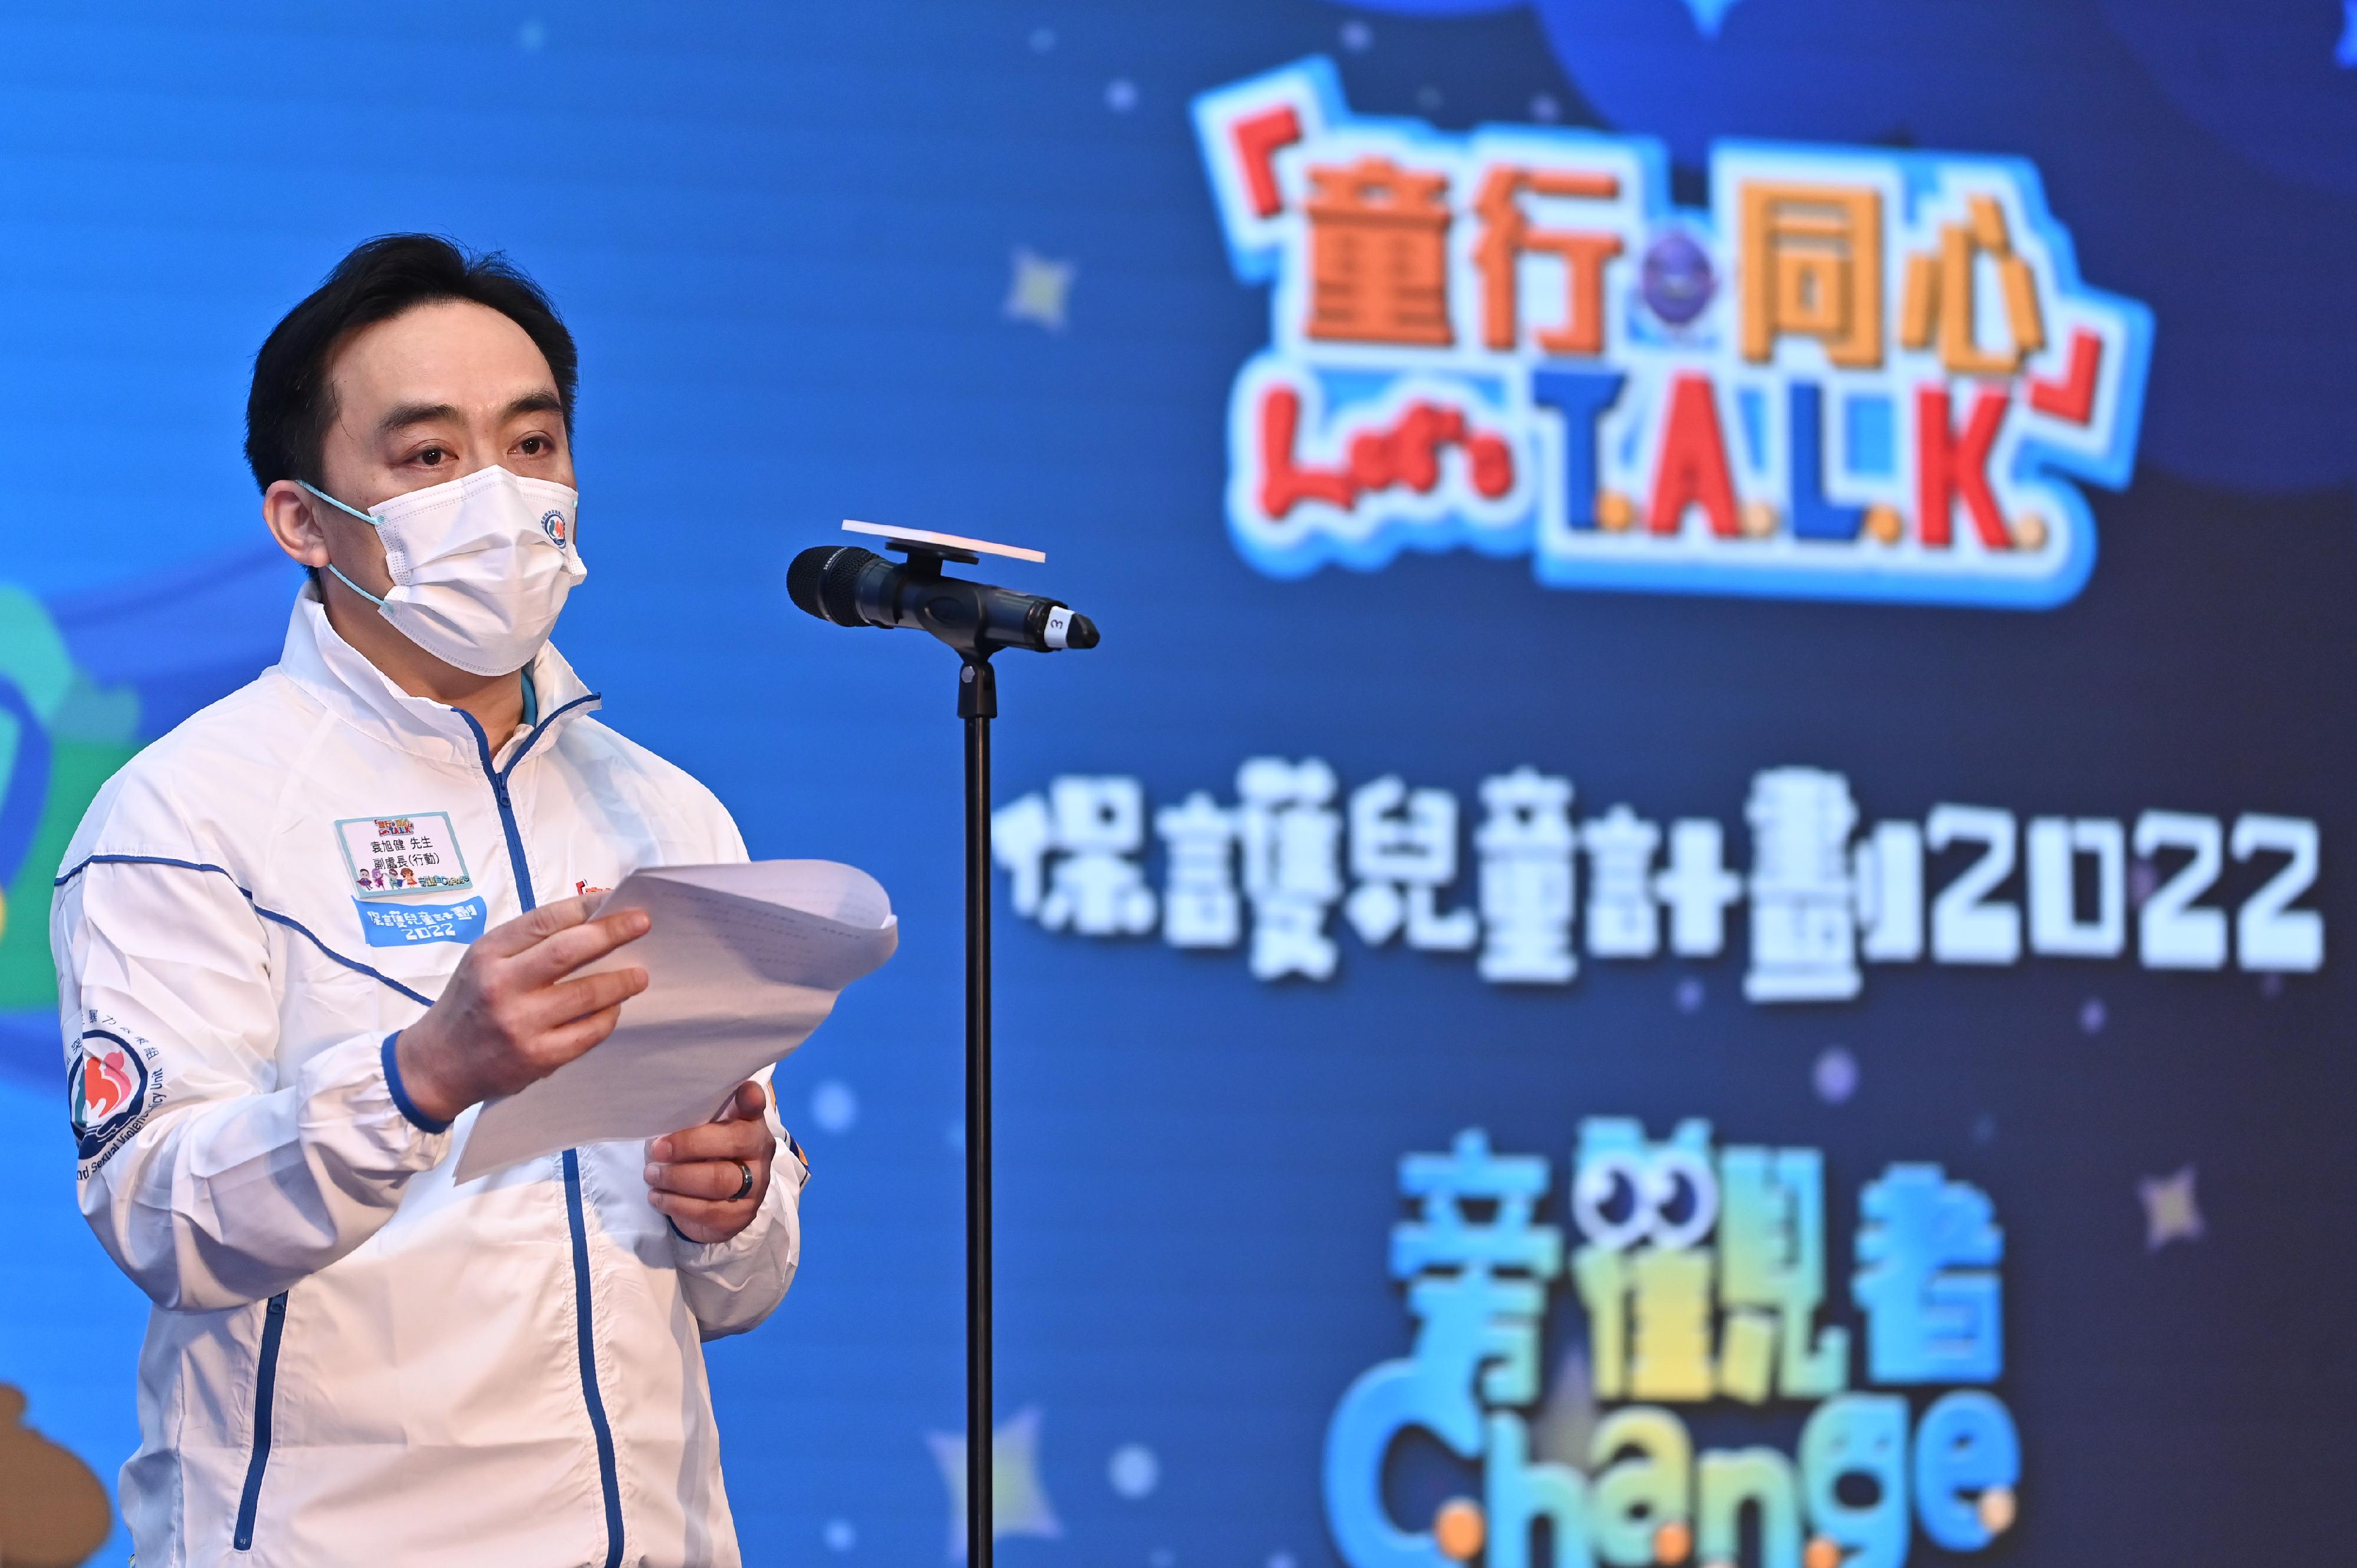 The Hong Kong Police Force held the Closing cum Award Presentation Ceremony for the "Let’s T.A.L.K. – Child Protection Campaign 2022" today (November 20). Photo shows the Deputy Commissioner of Police (Operations), Mr Yuen Yuk-kin, delivering a speech at the ceremony.